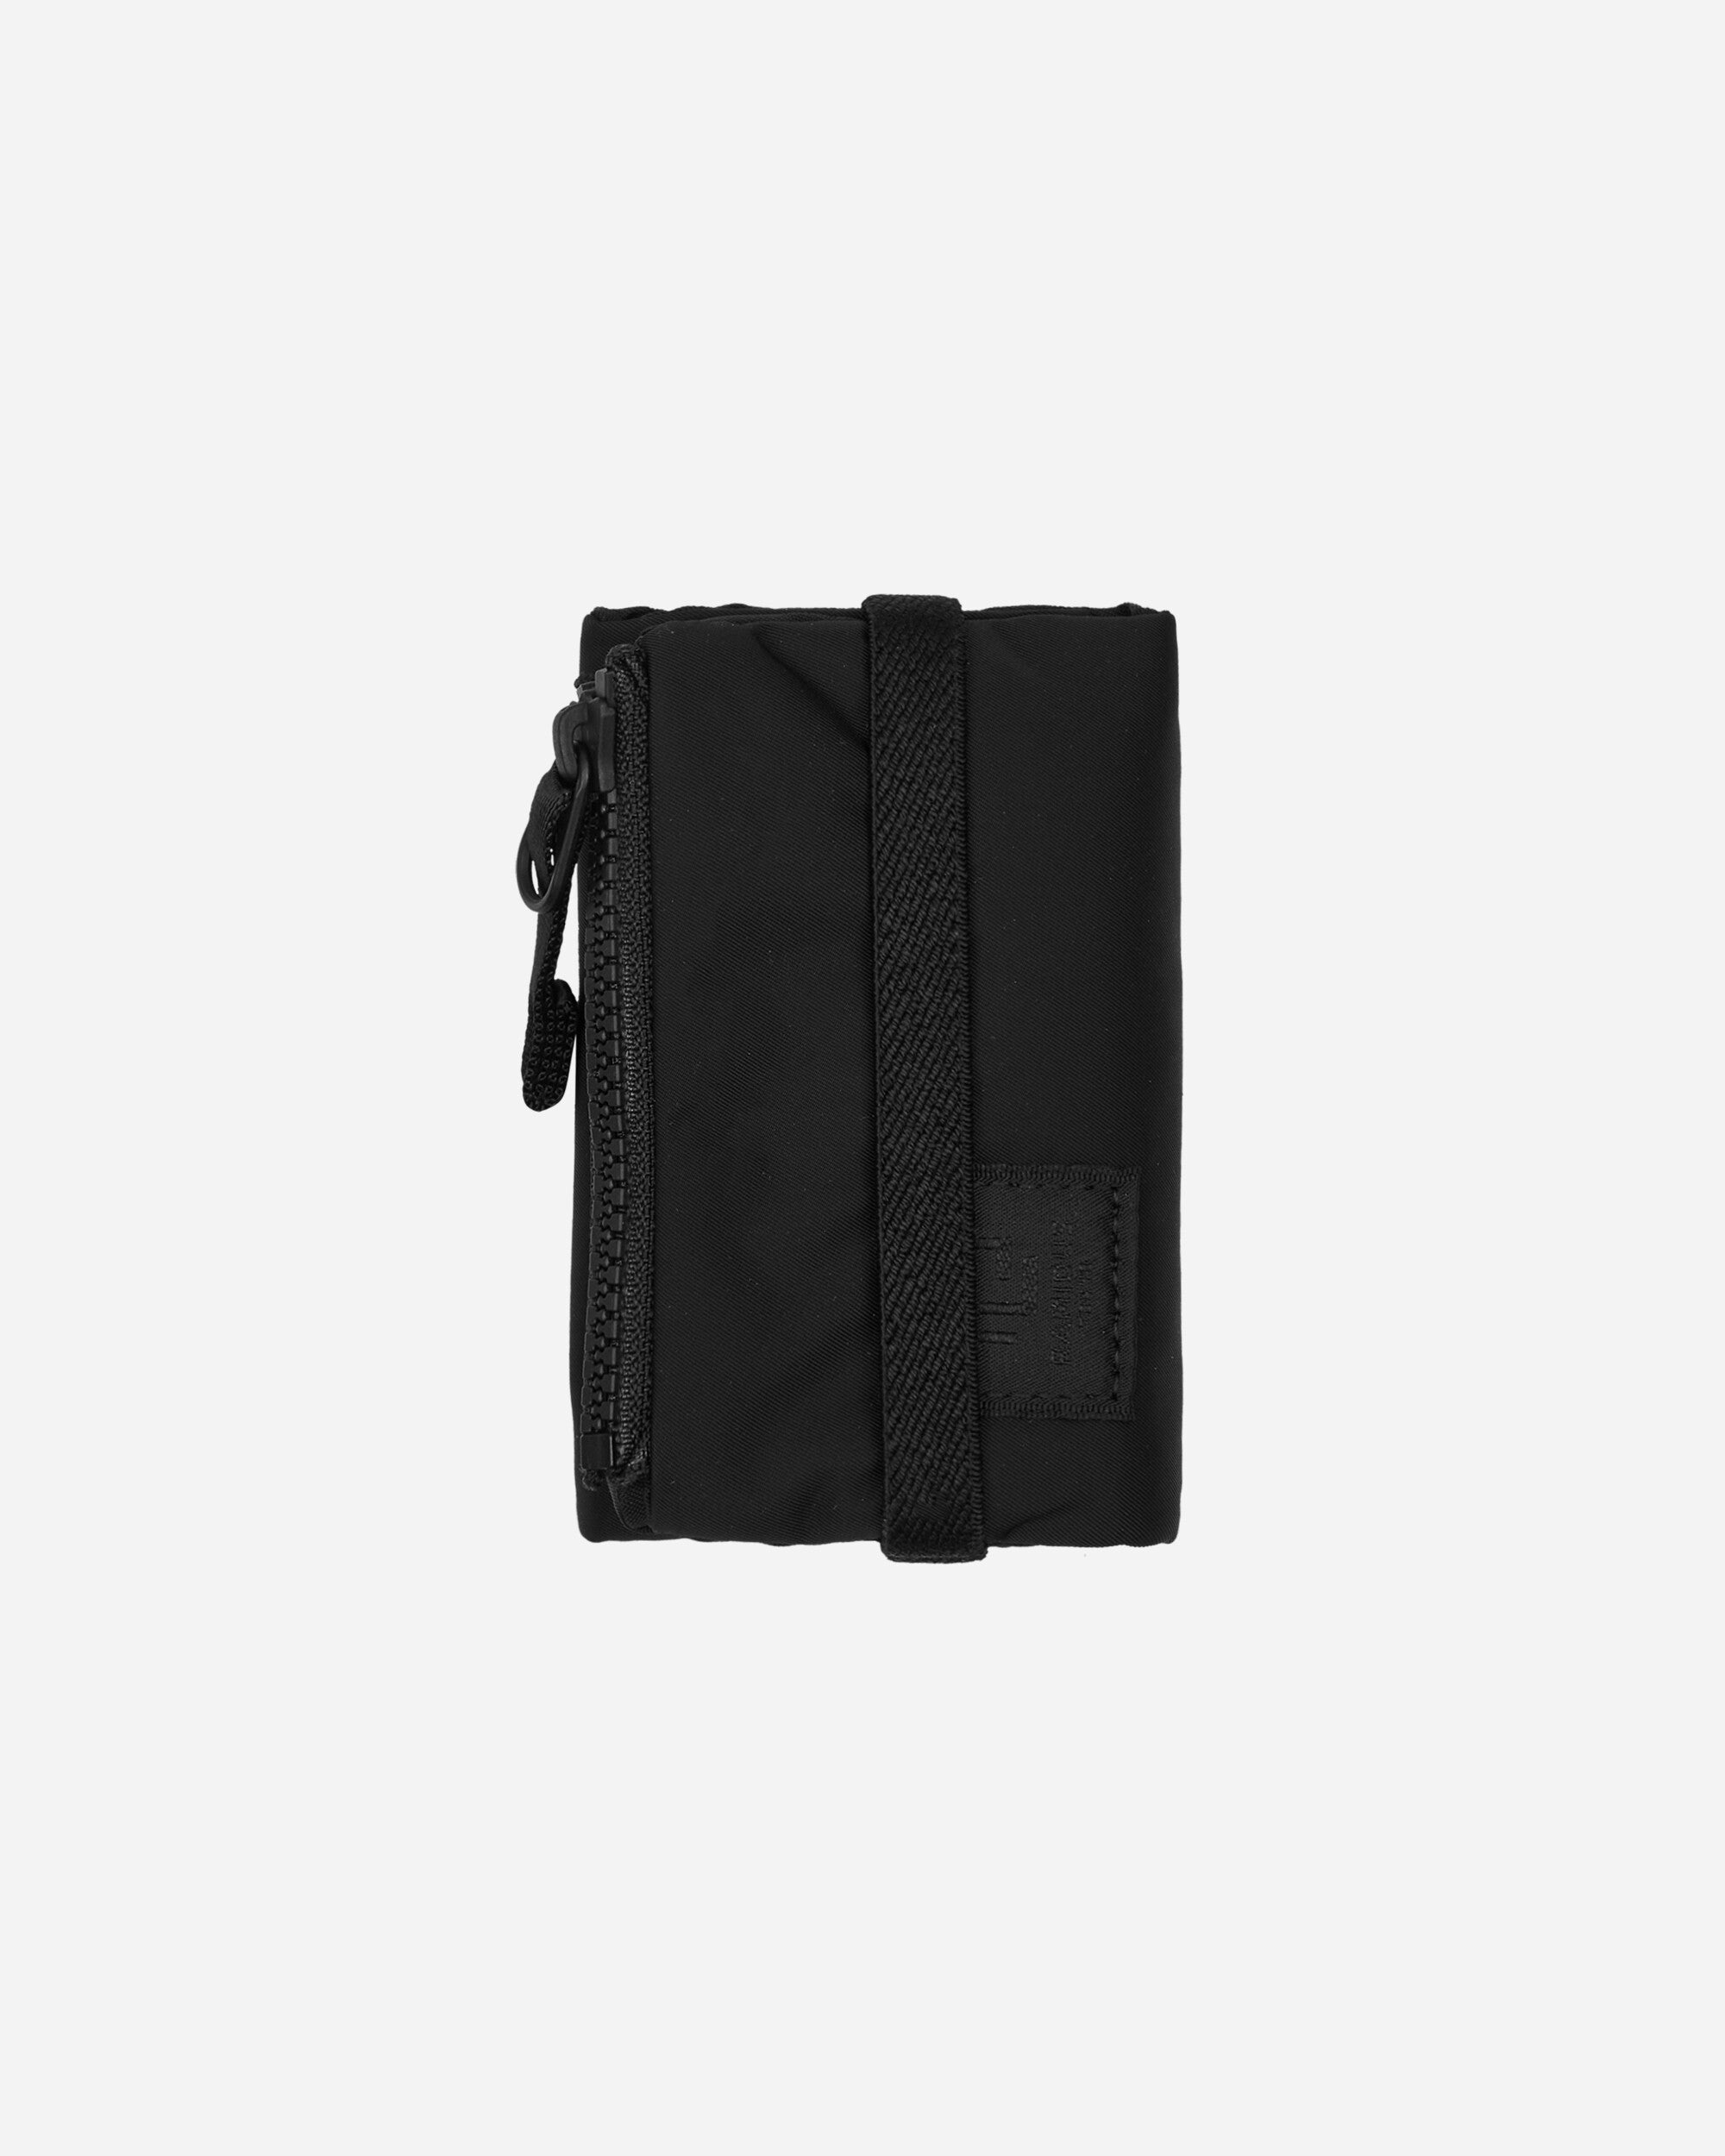 Ramidus Band Wallet Black Wallets and Cardholders Wallets B011024 001